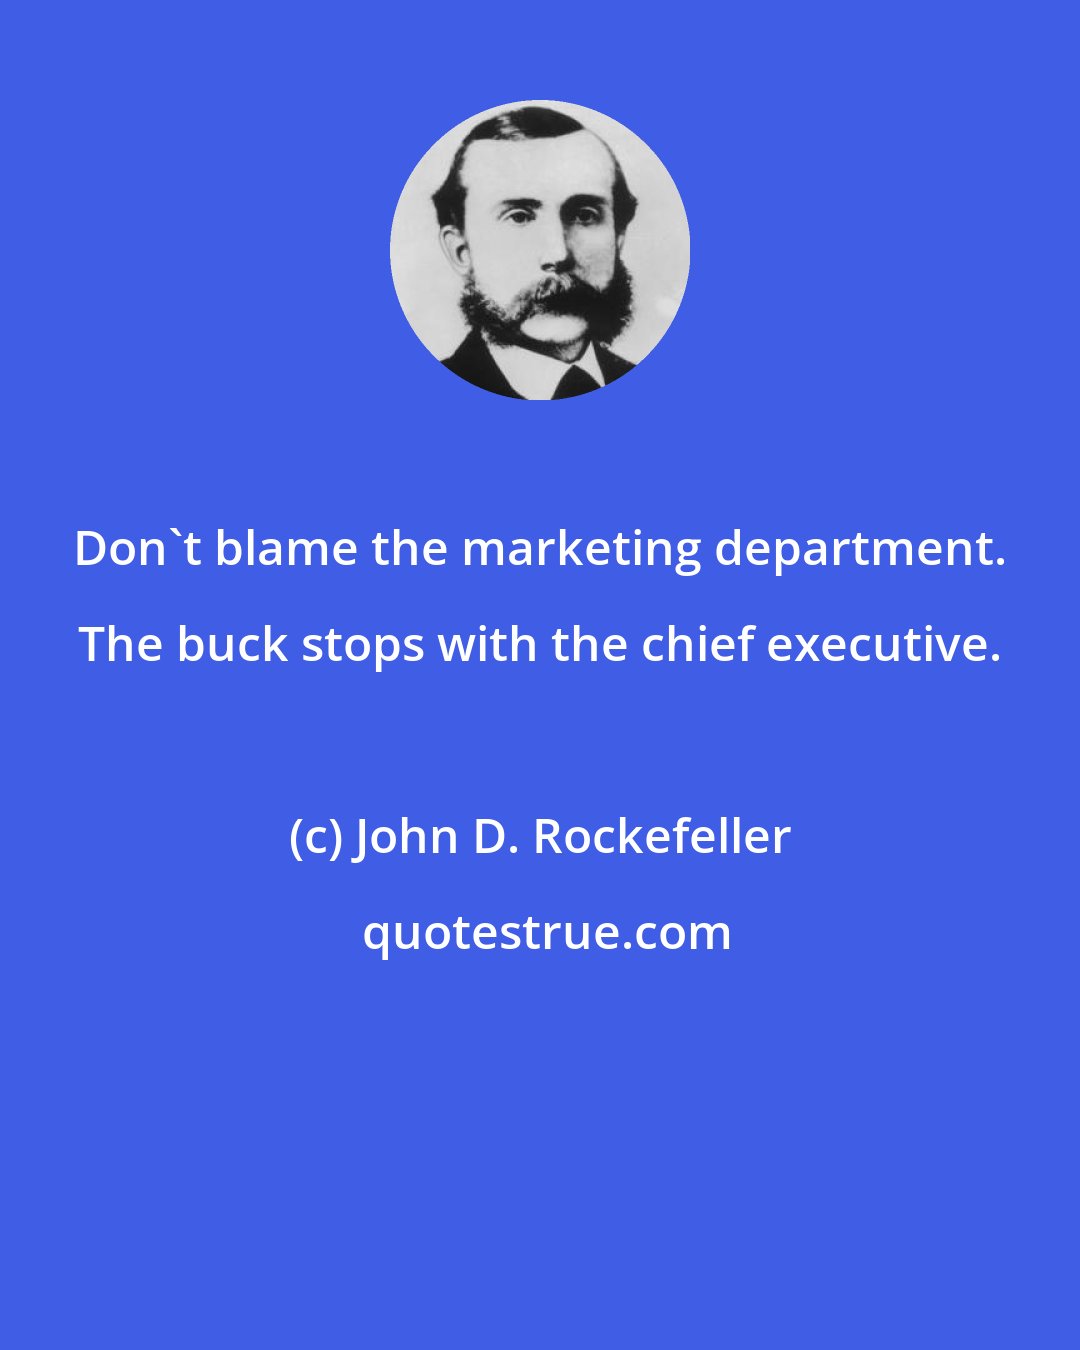 John D. Rockefeller: Don't blame the marketing department. The buck stops with the chief executive.